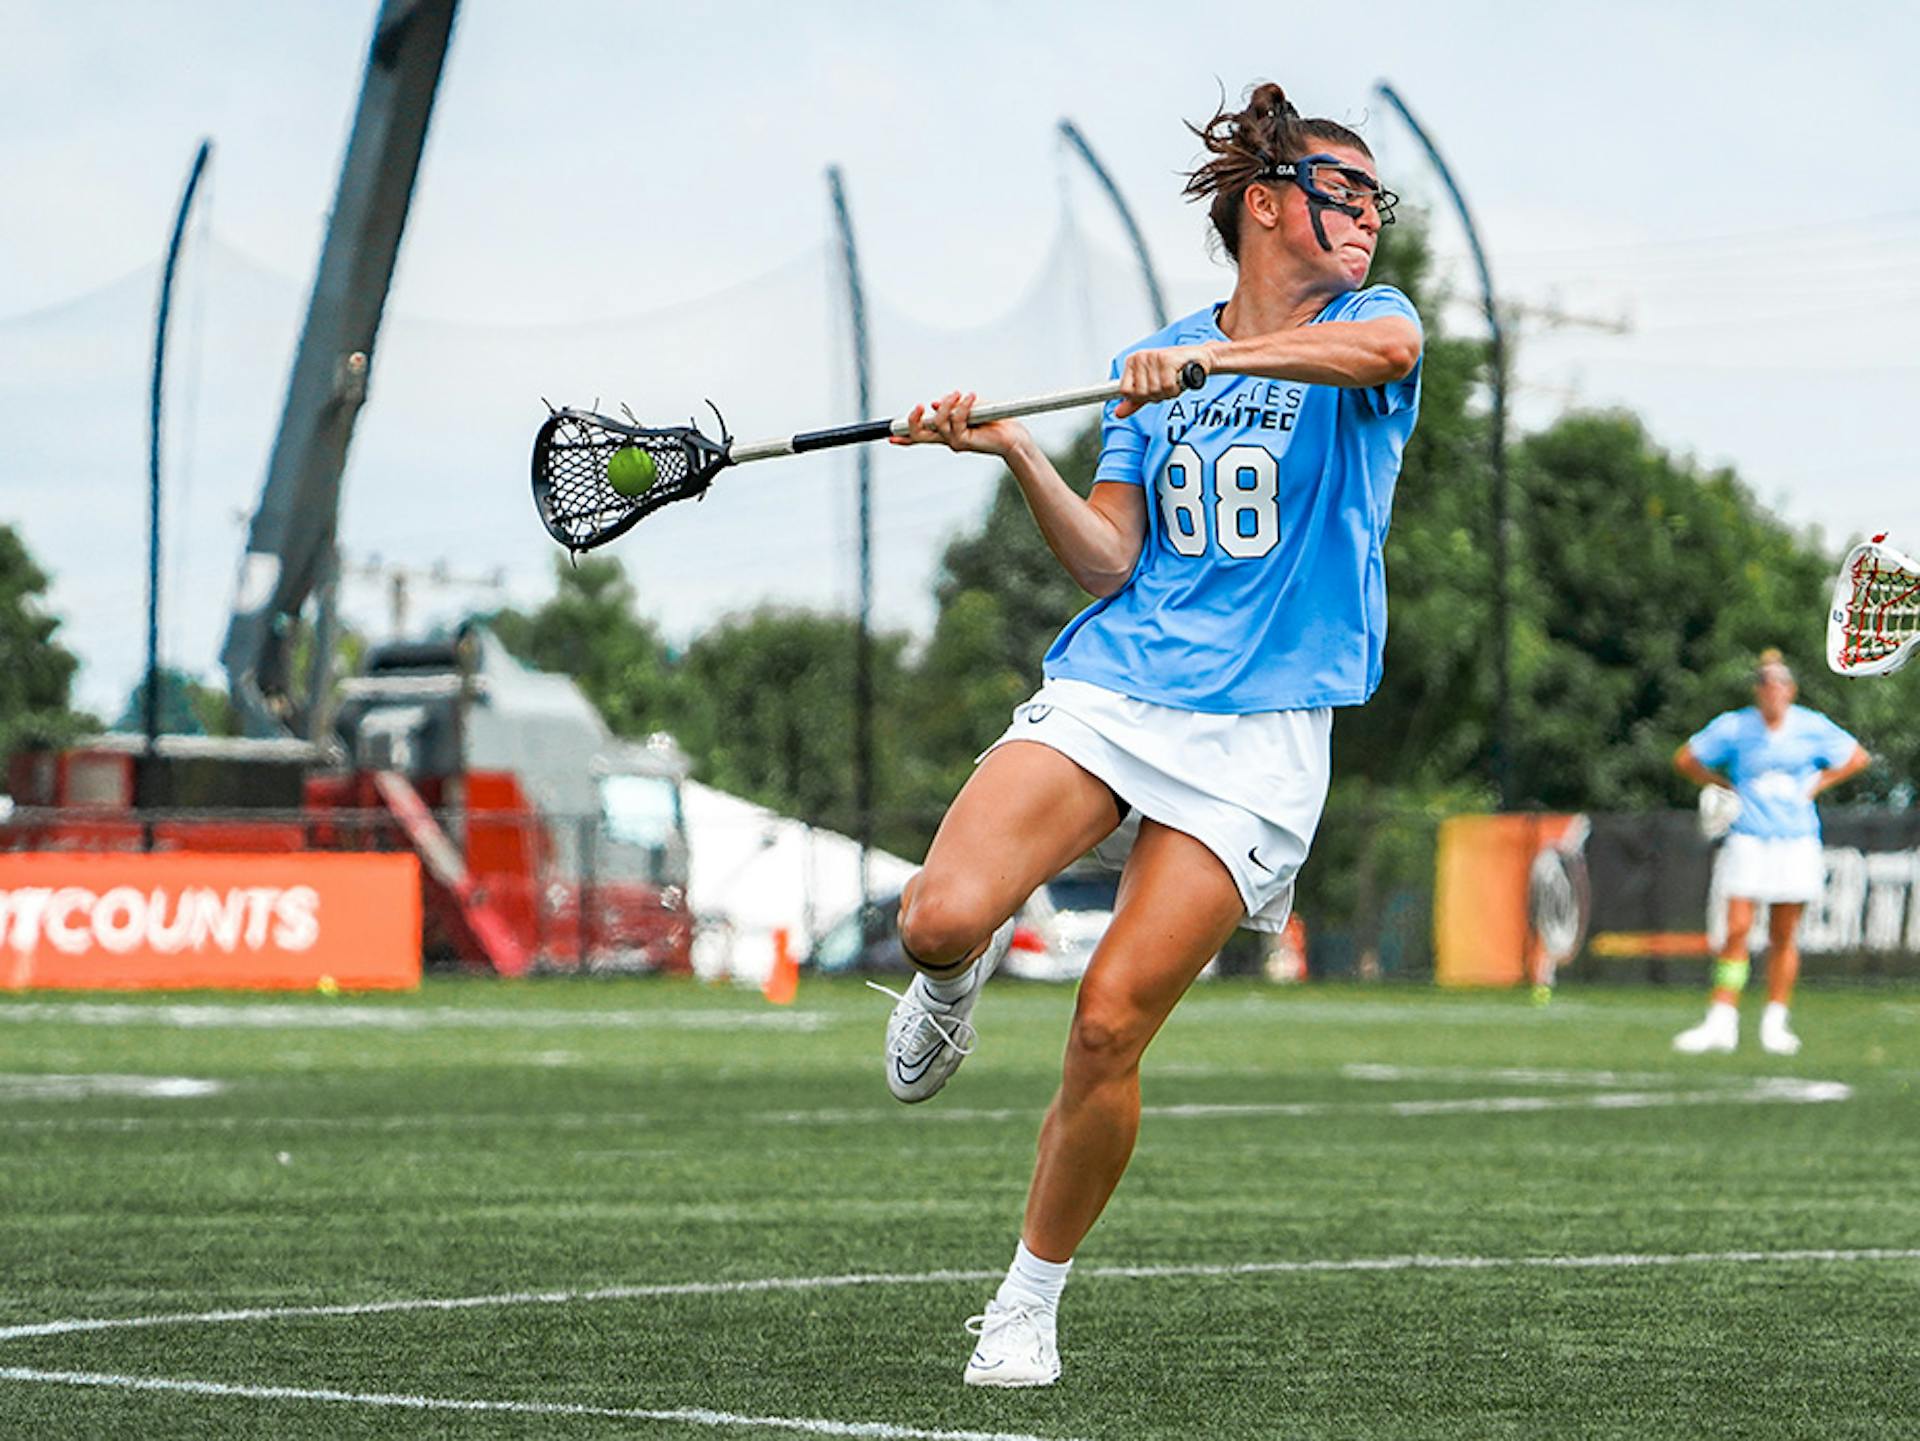 28 Players Sign to Compete in AU Lacrosse Season 3